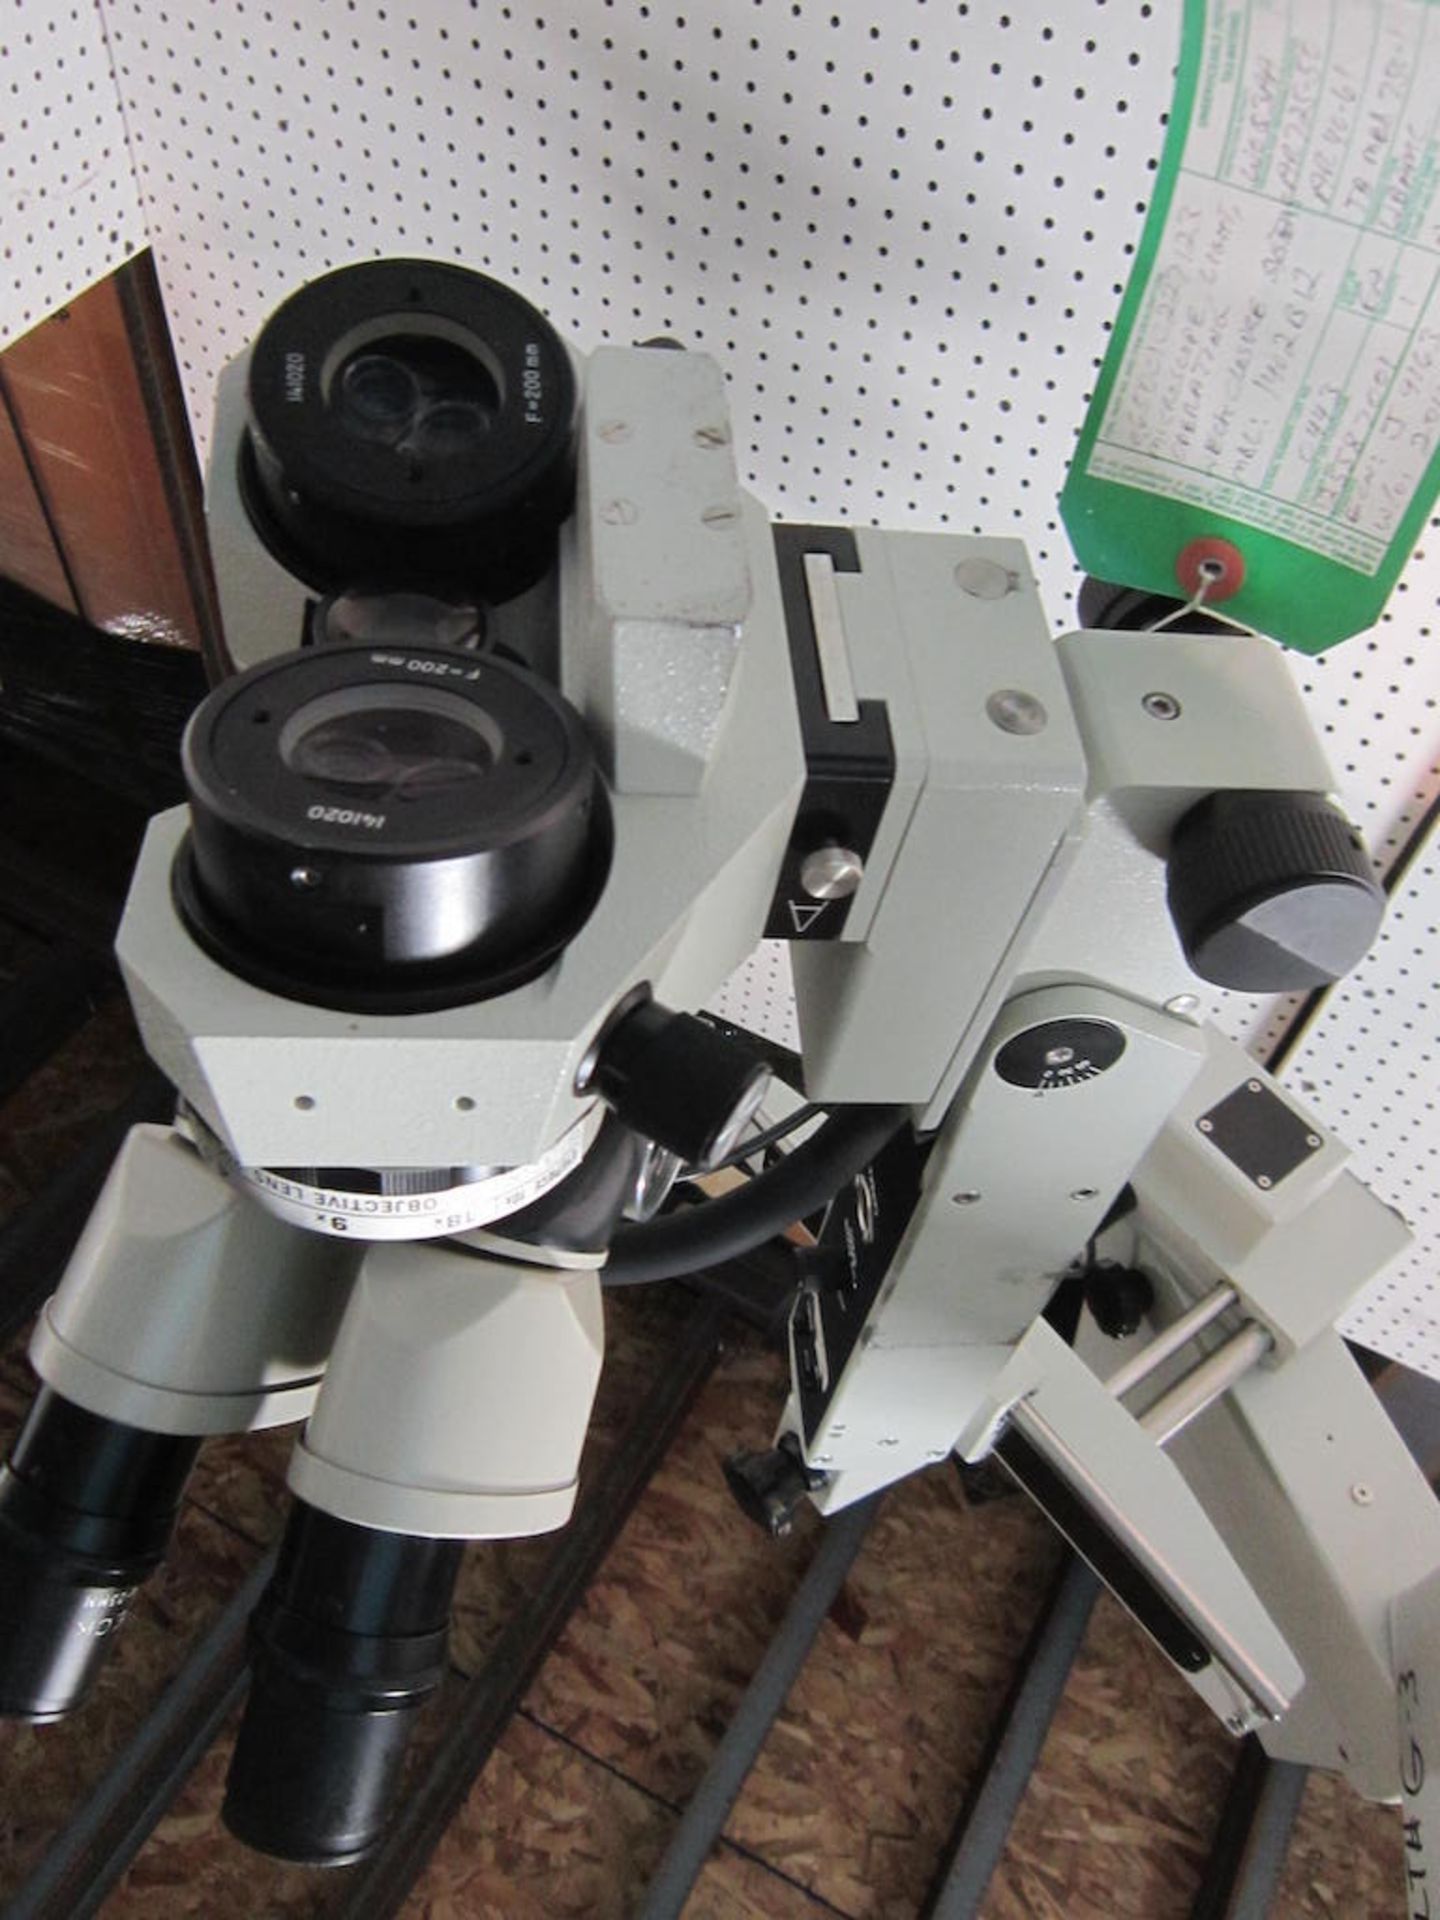 Weck Surgical Systems Microscope 1402 B12 with Light, Object Lens 200mm with Foot Switch - Image 16 of 16